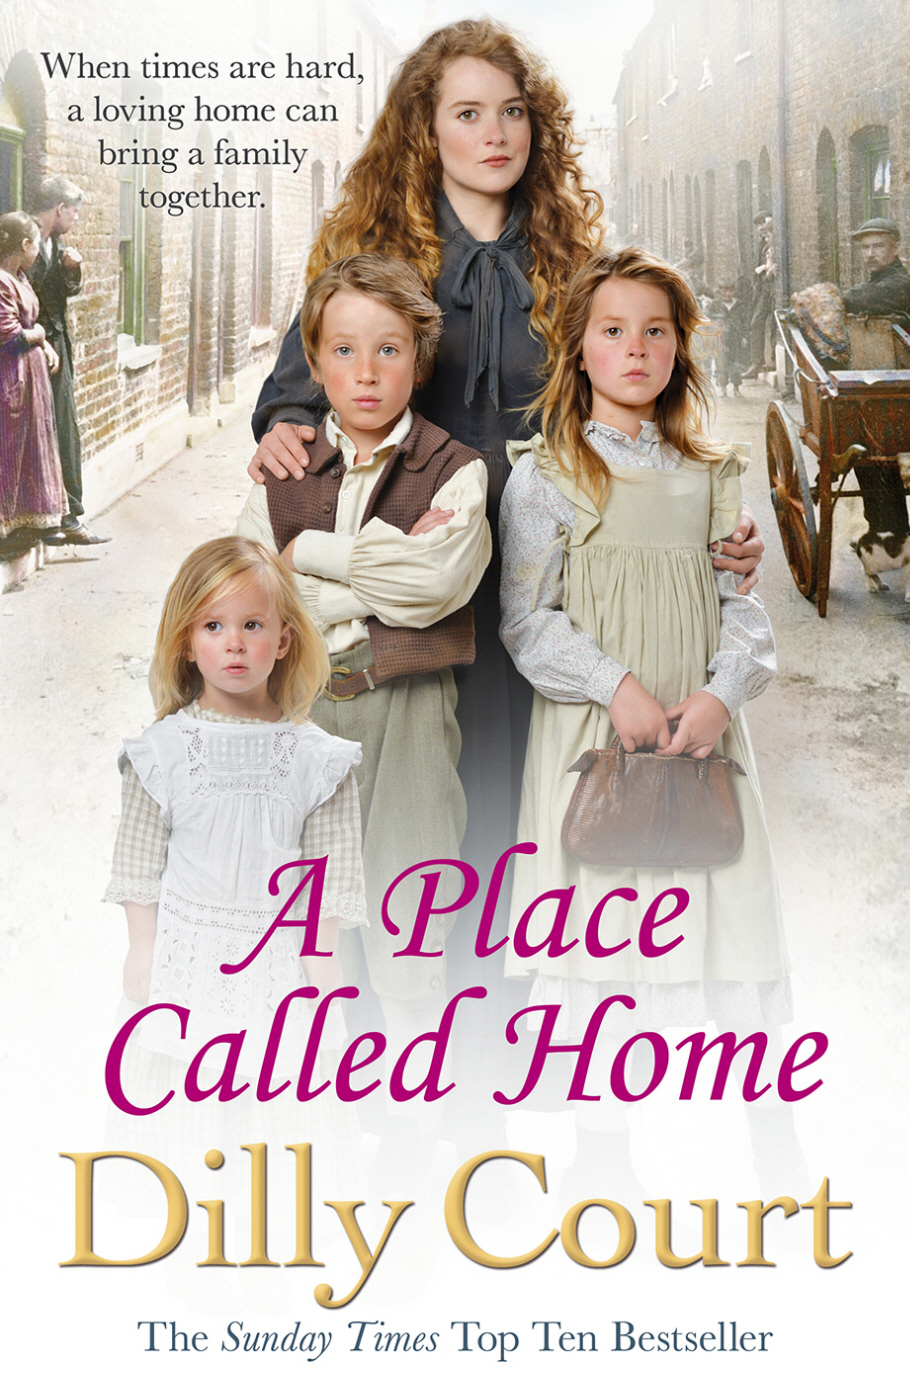 A Place Called Home (2014) by Dilly Court